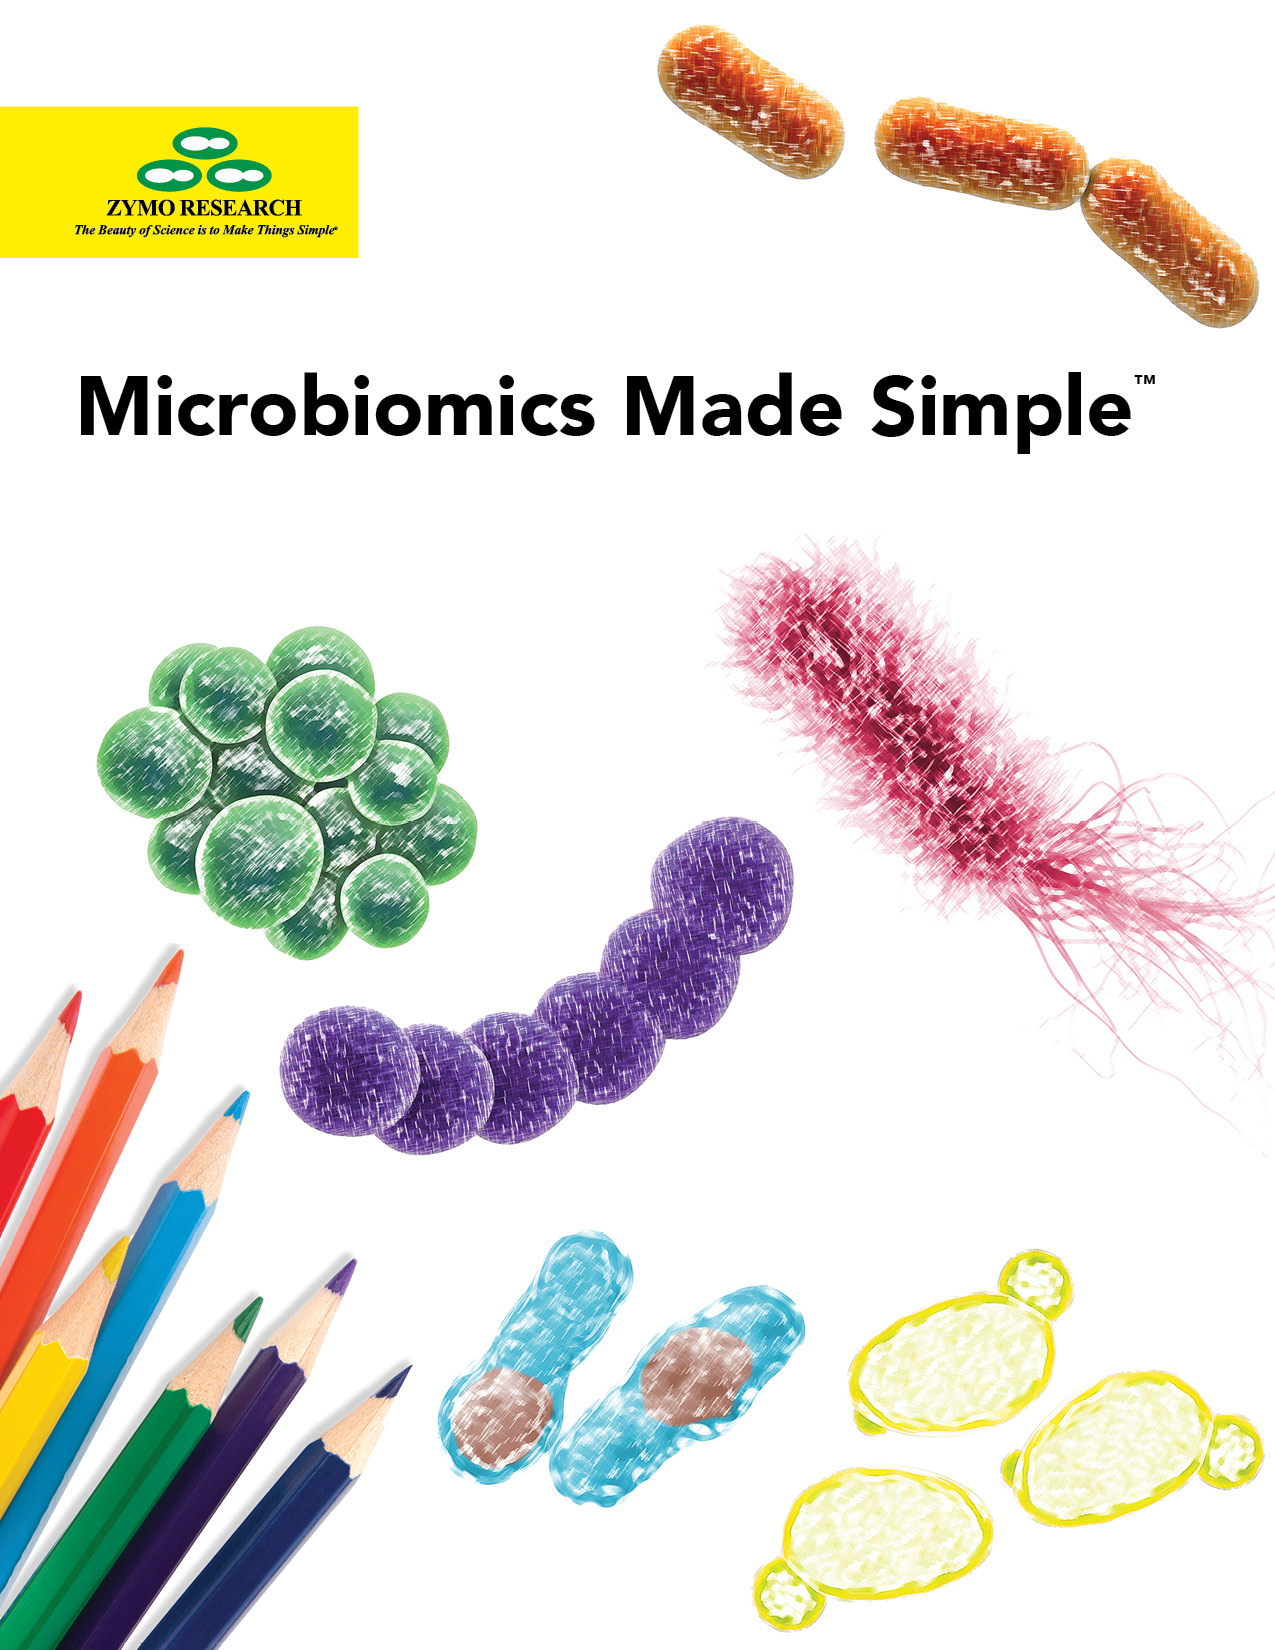 A collection of 4 different microorganisms colored in with colored pencils